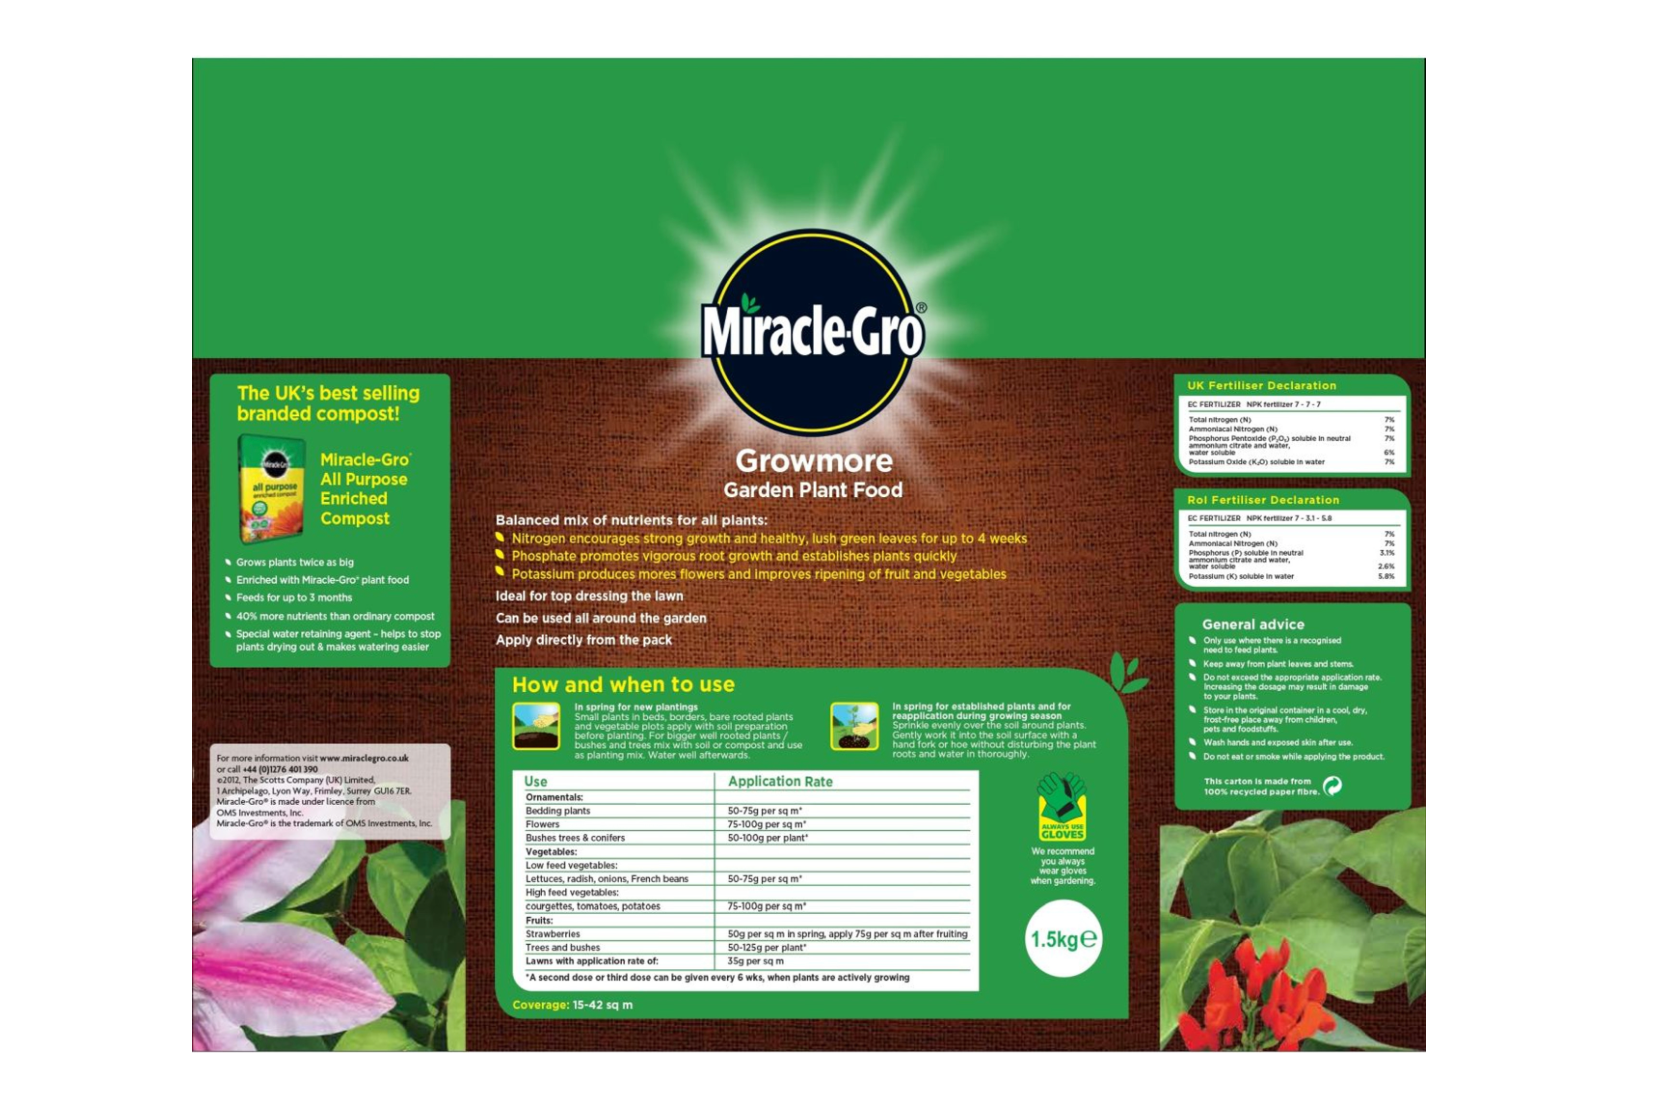 Miracle-Gro  Growmore Garden Plant Food